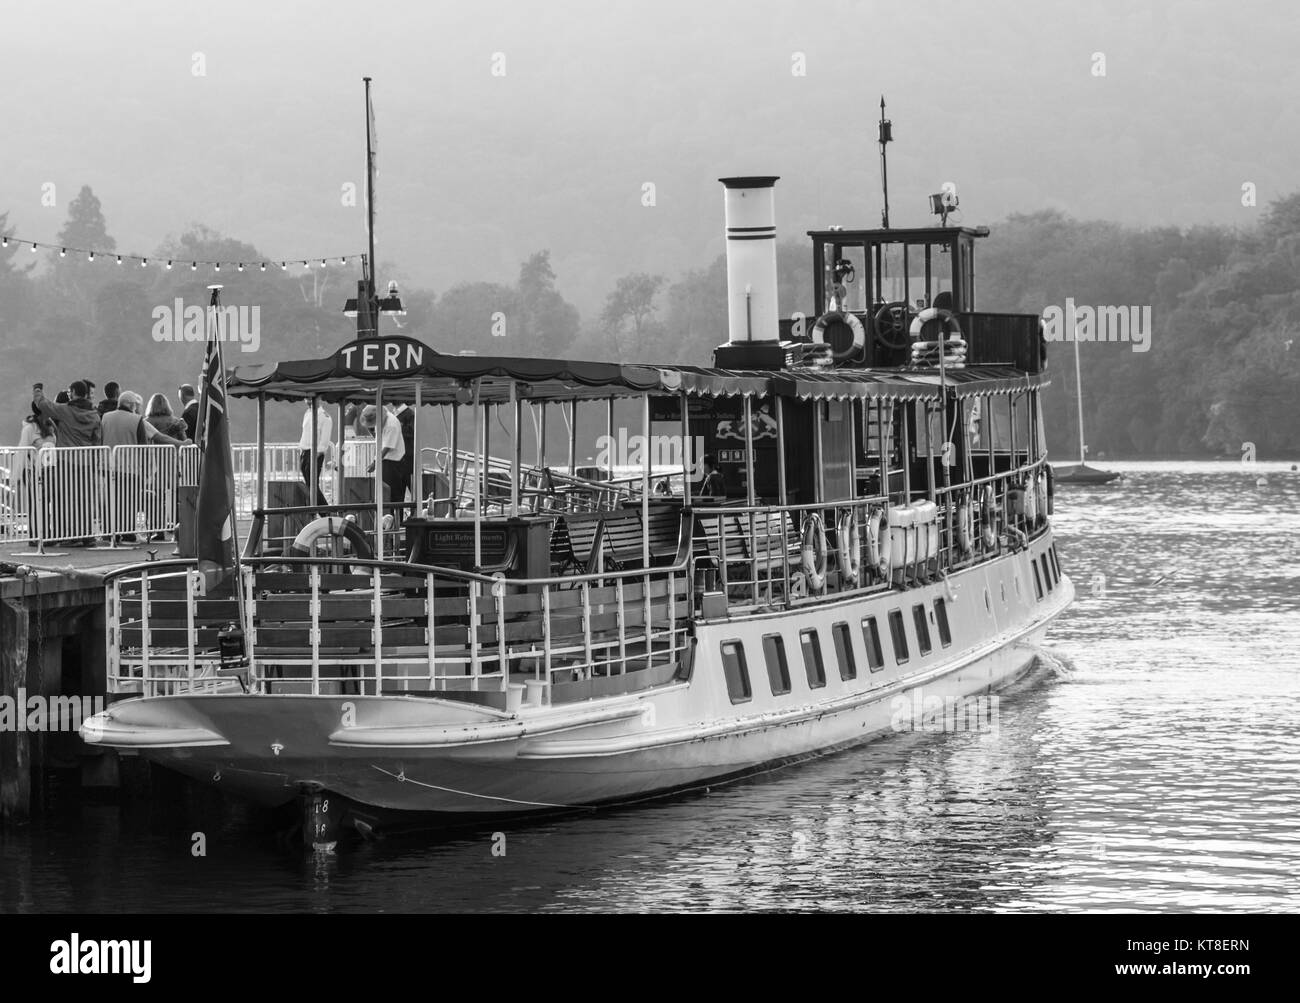 Former Steam Powered Cruise Ship 'Tern' with day-trippers at Ambleside on Lake Windermere in The Lake District, Cumbria, England, UK Stock Photo